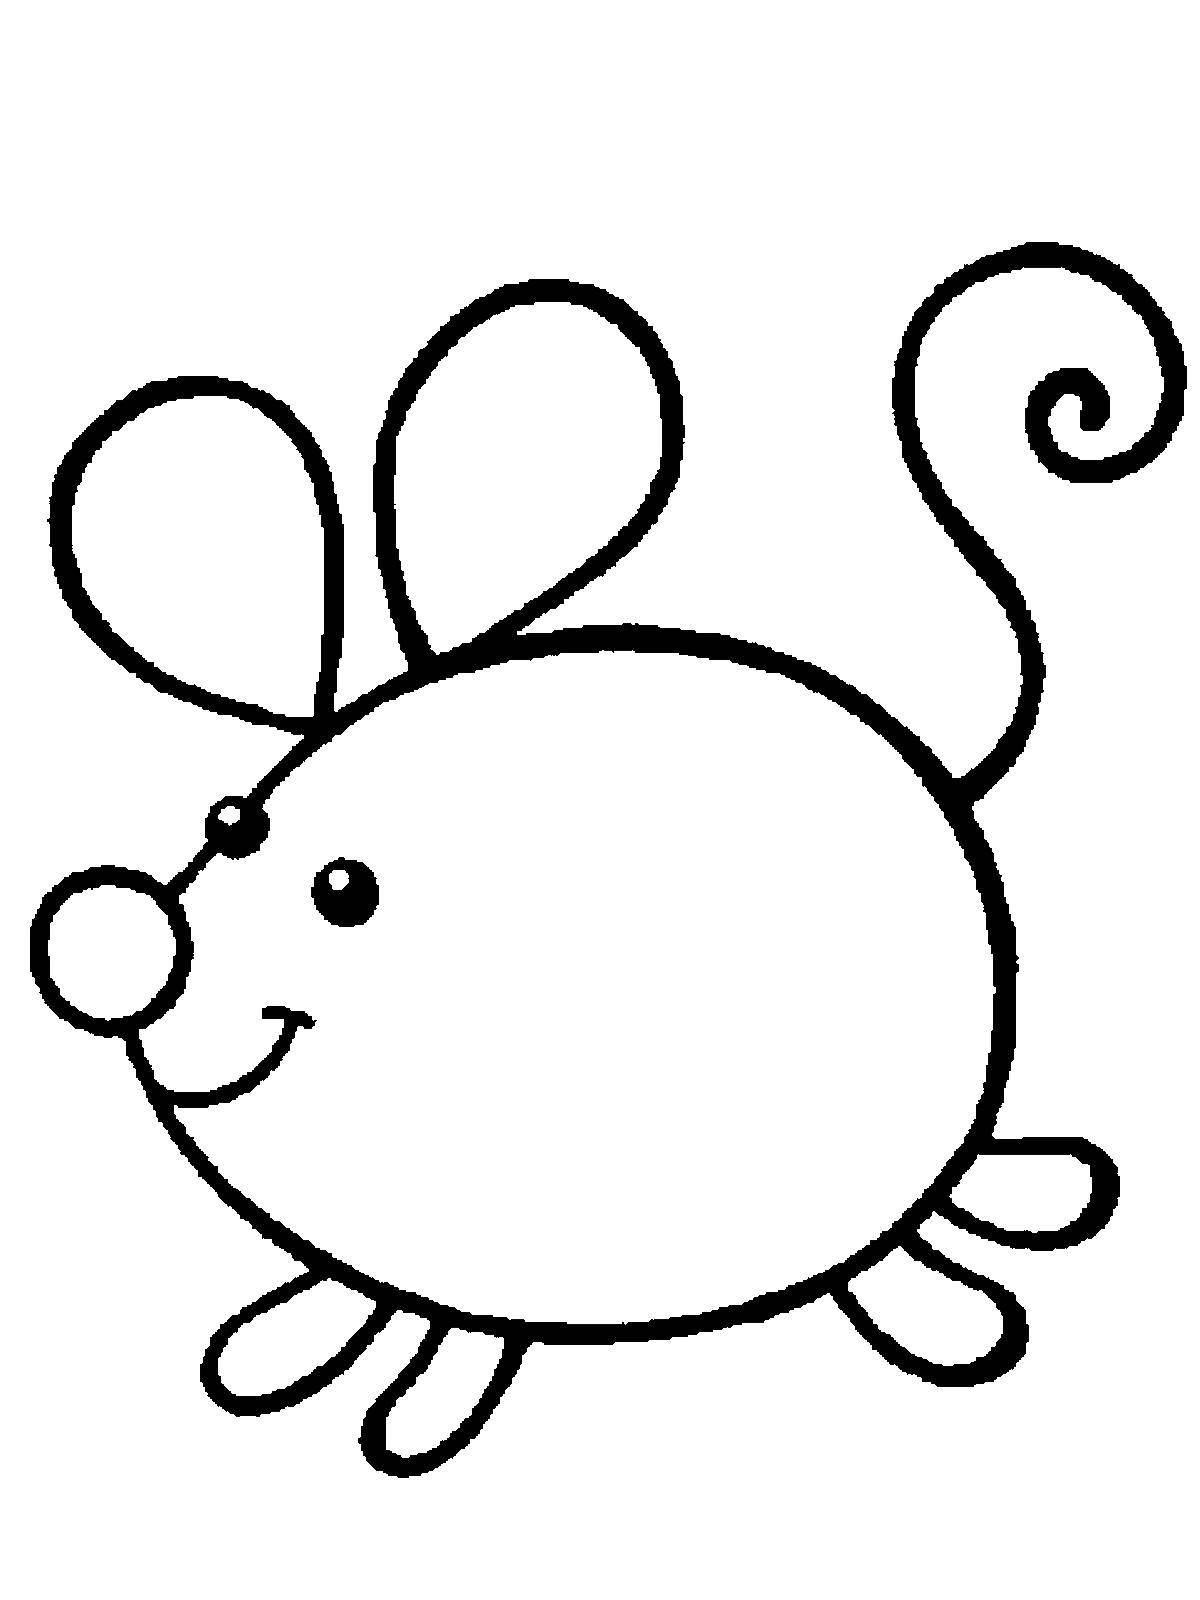 Coloring Little mouse. Category little ones. Tags:  Animals, mouse.